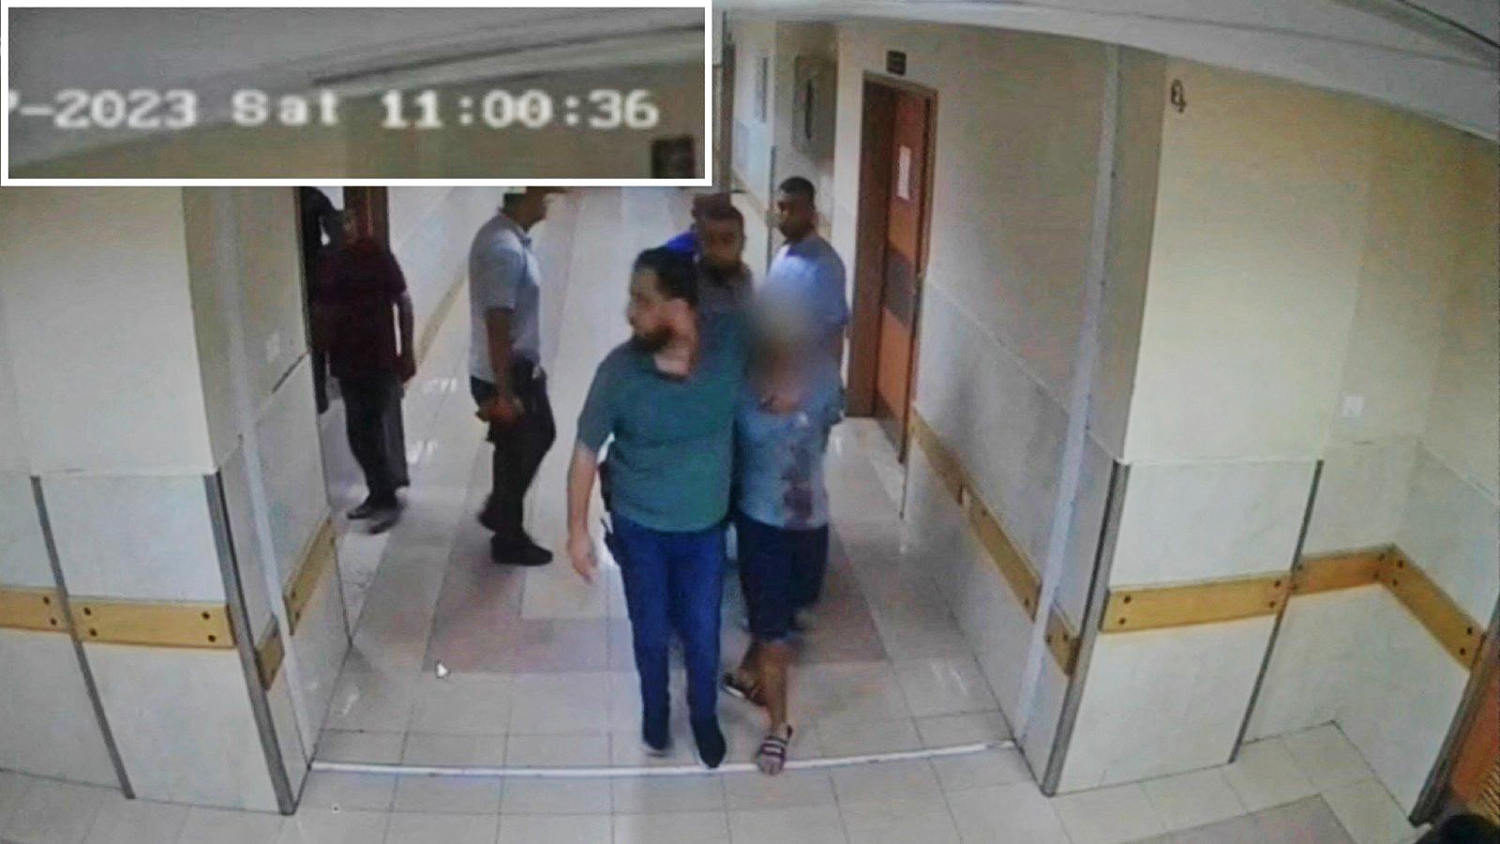 Israel says new videos show Hamas hostages and a tunnel at Al-Shifa Hospital